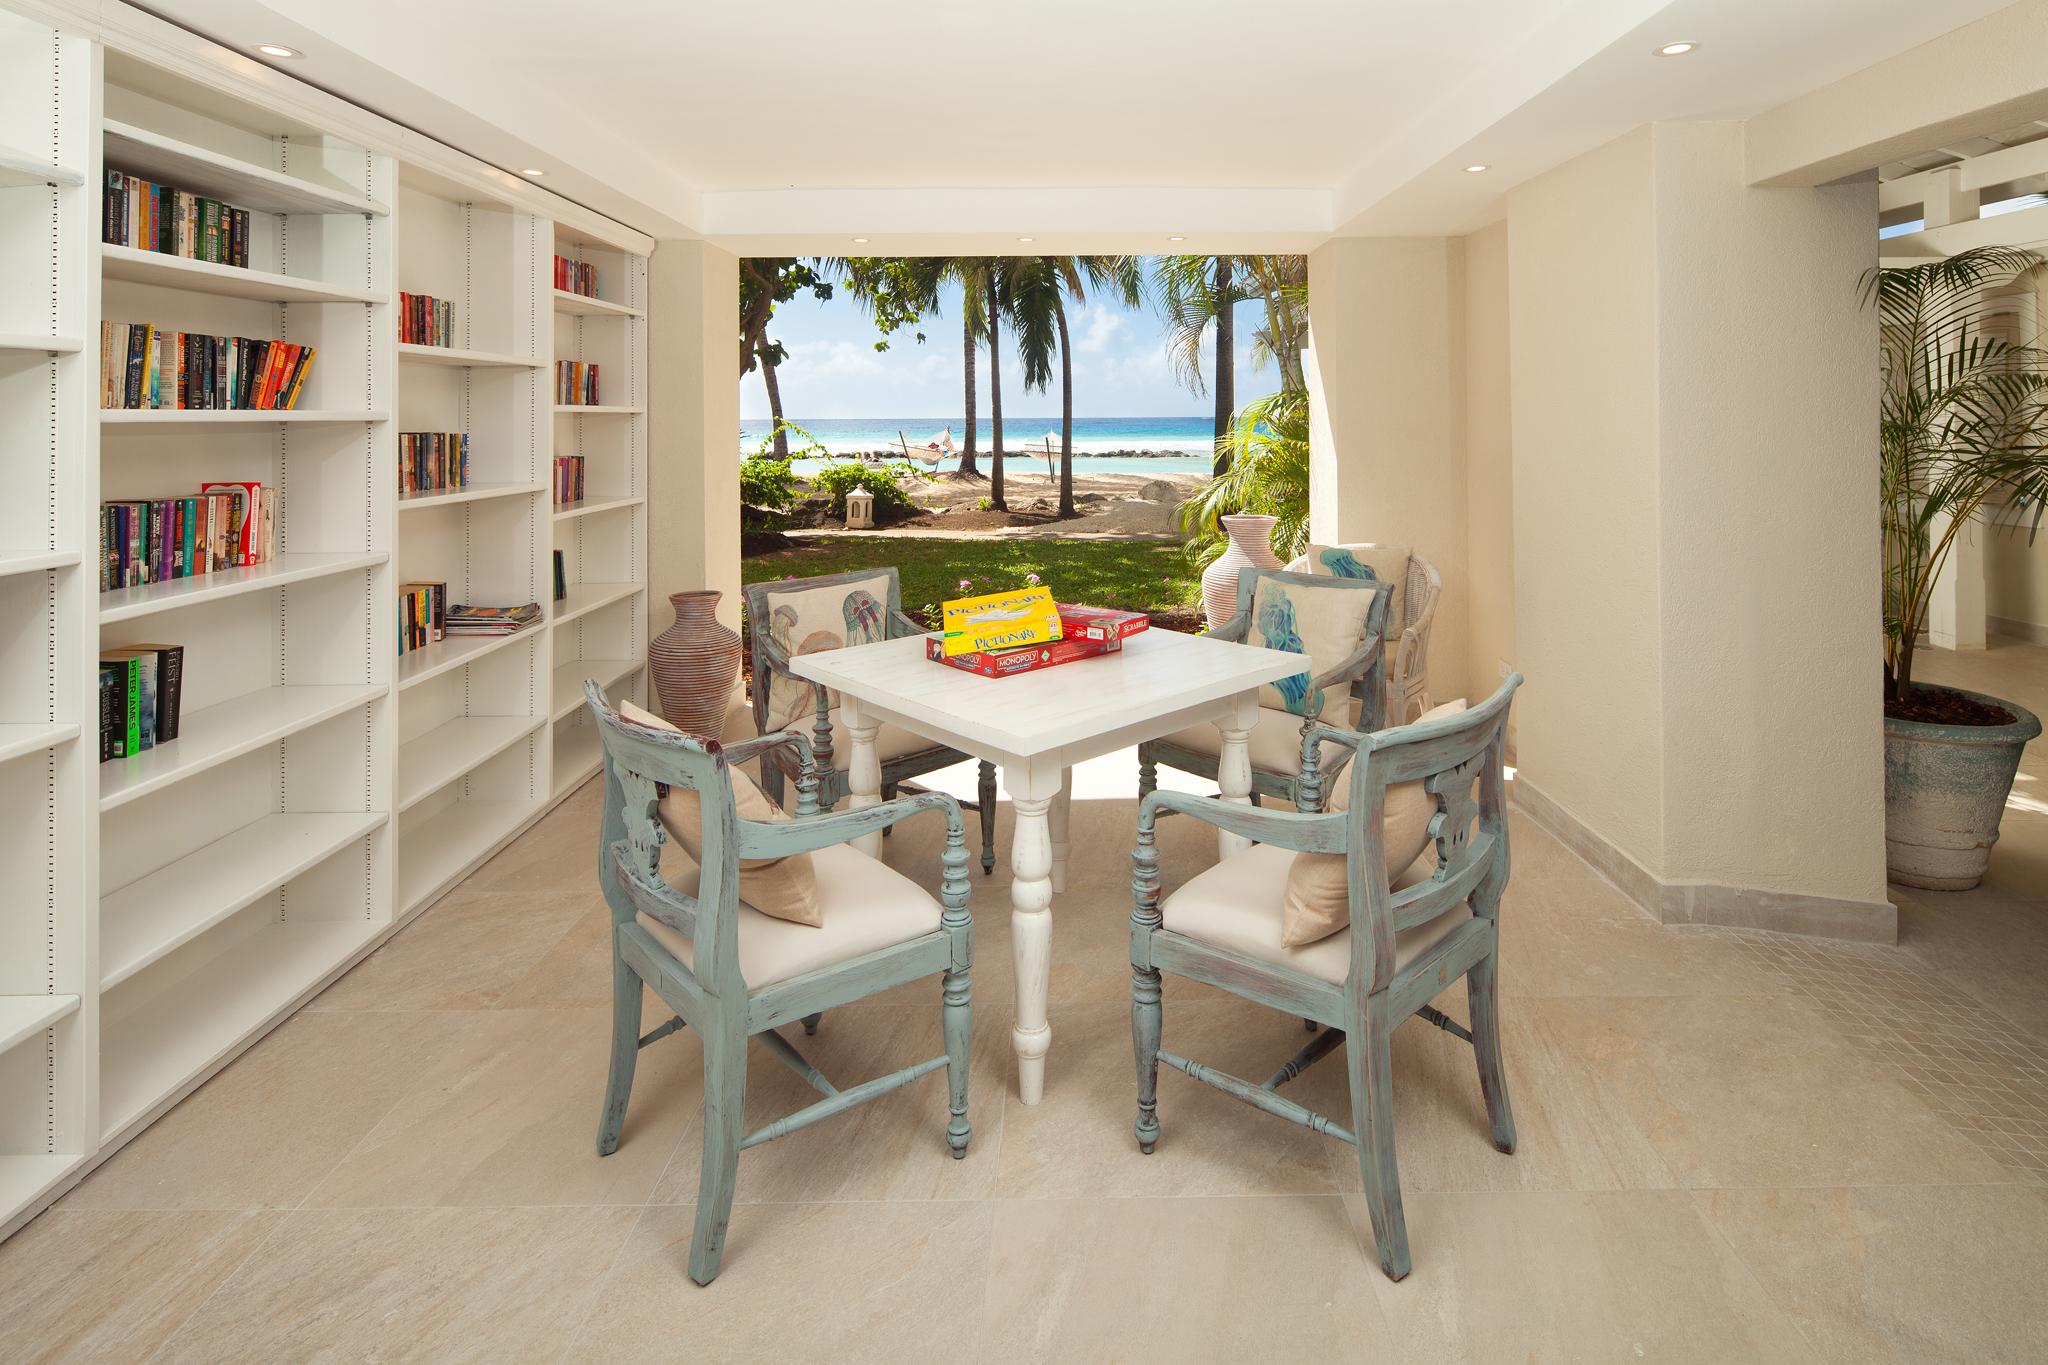 &#13;
Cosy up with a good book in the beachfront lounge at Sugar Bay&#13;